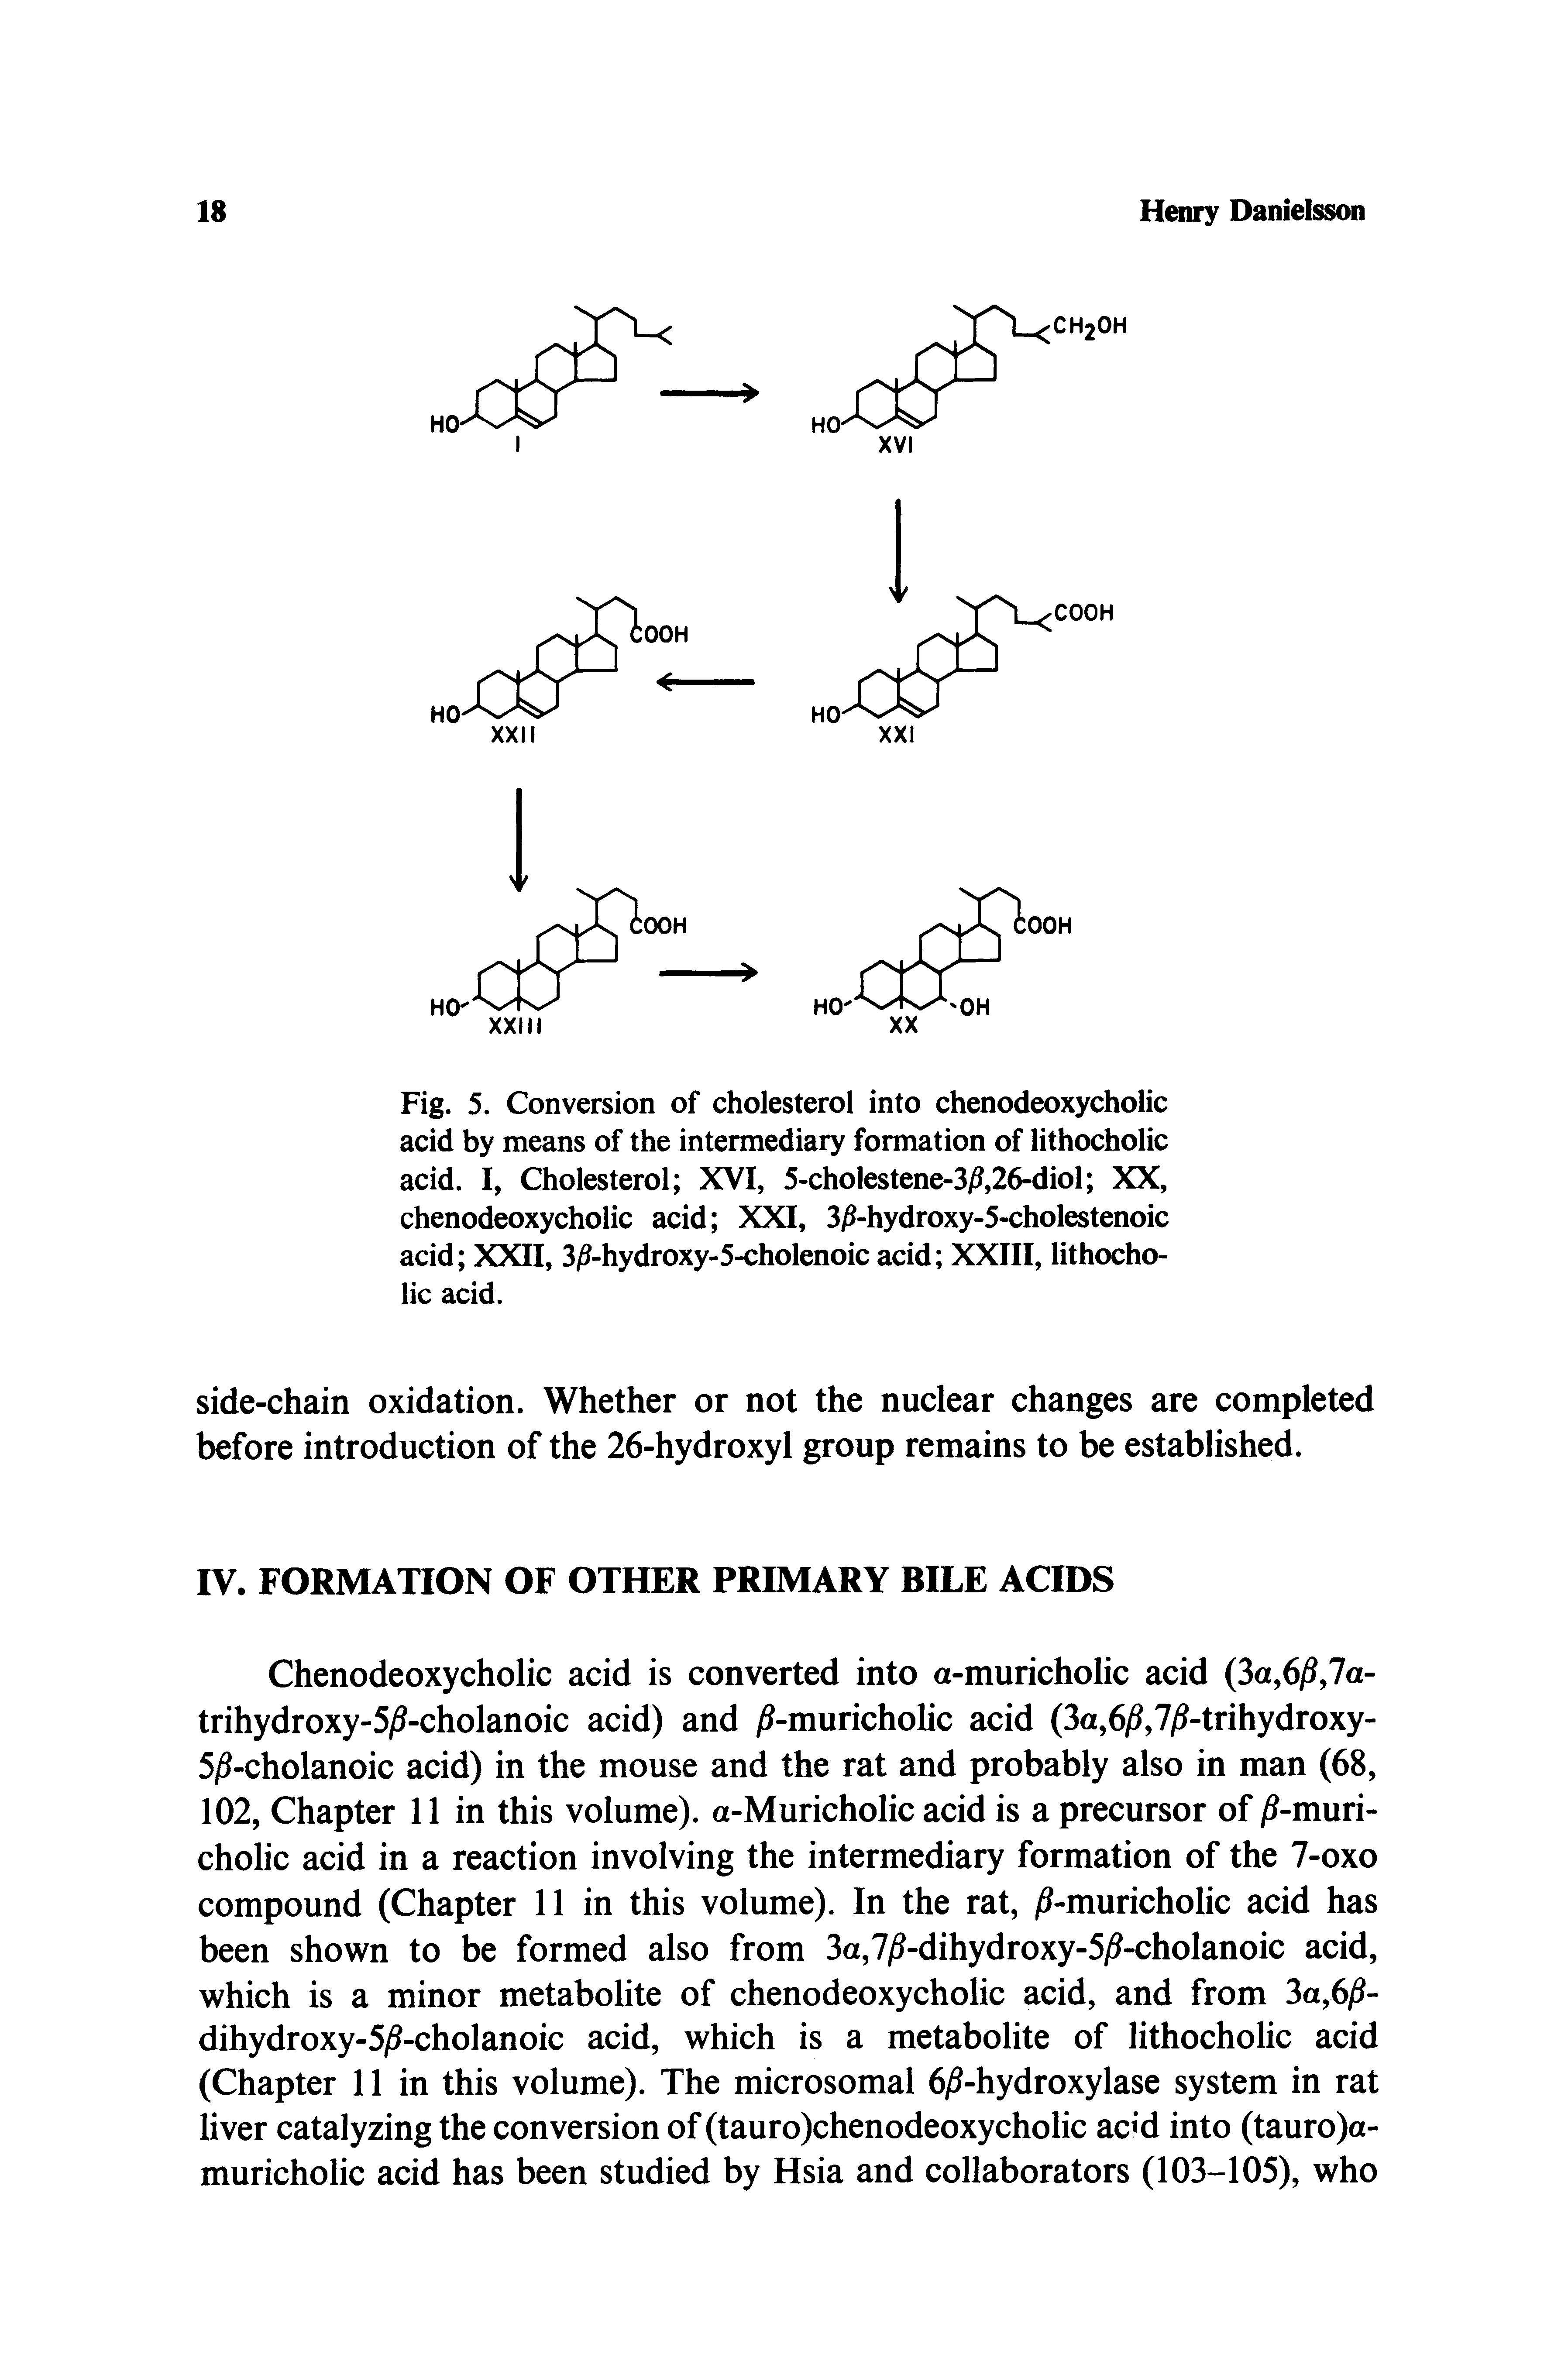 Fig. 5. Conversion of cholesterol into chenodeoxycholic acid by means of the intermediary formation of lithocholic acid. I, Cholesterol XVI, 5-cholestene-3ft26-diol XX, chenodeoxycholic acid XXI, 3j5-hydroxy-5-cholestenoic acid XXII, 3/ -hydroxy-5-cholenoic acid XXIII, lithocholic acid.